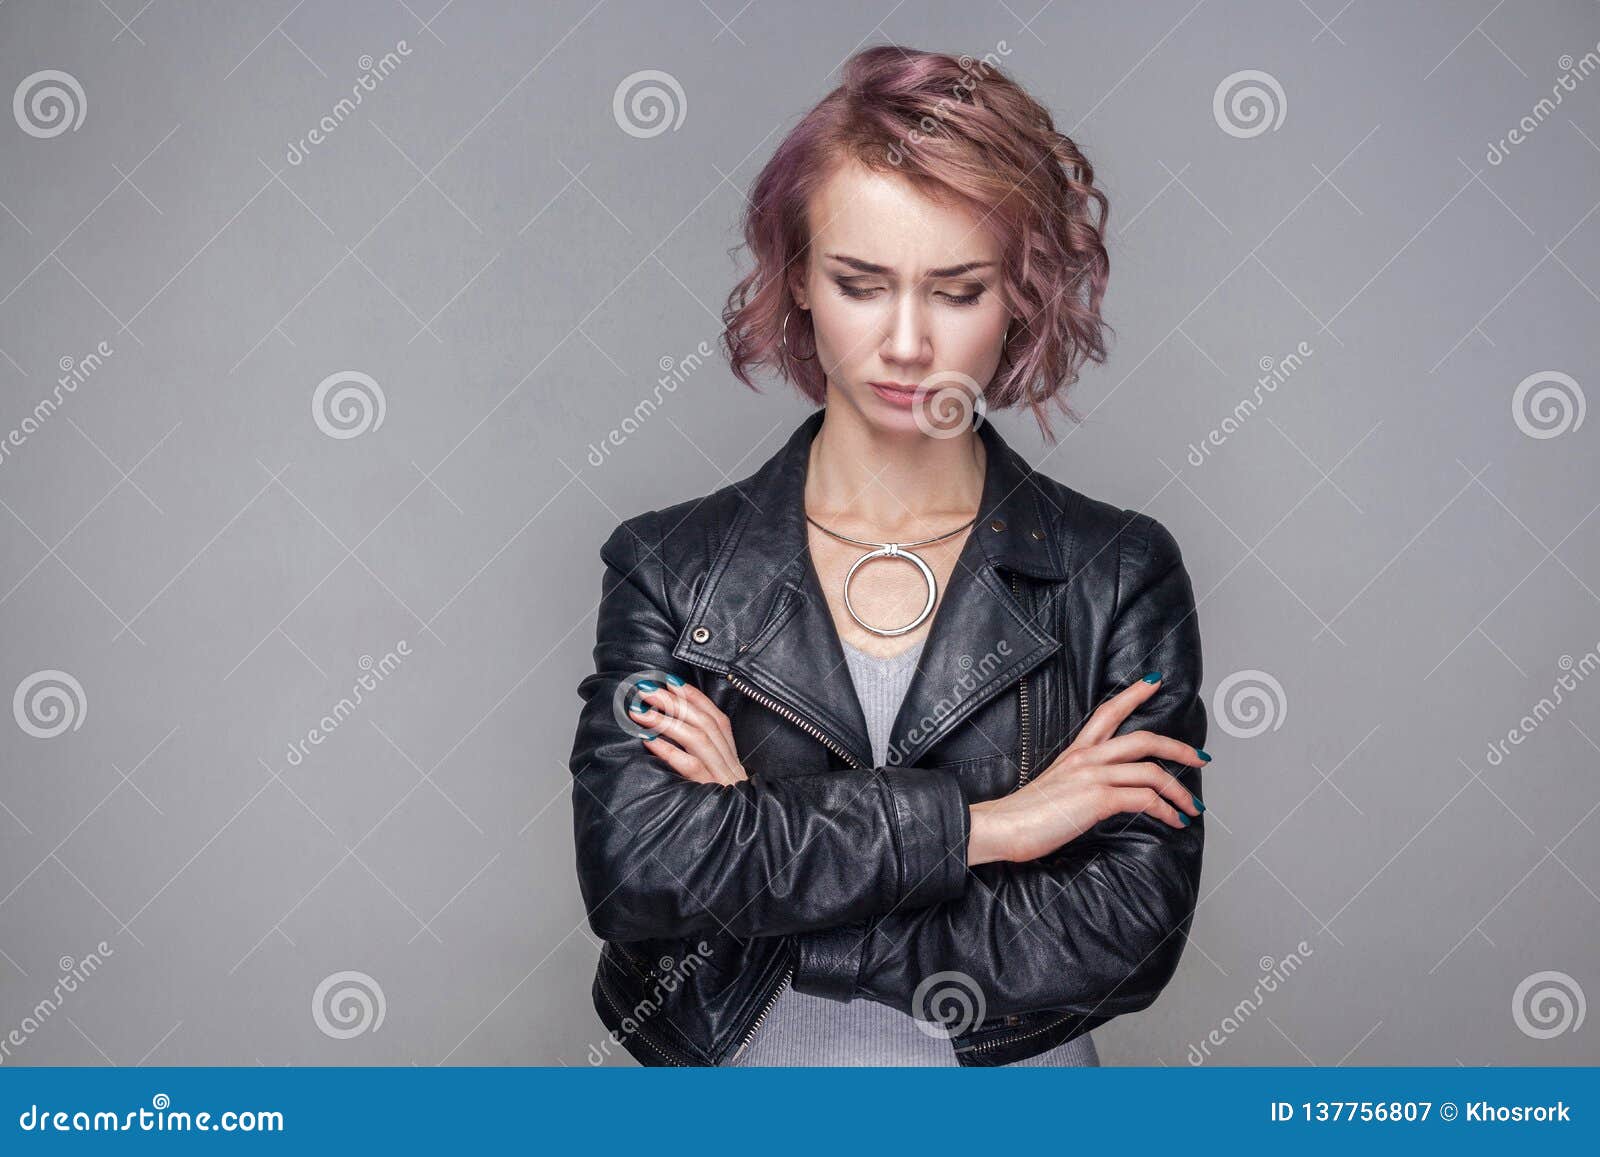 Portrait of Unhappy Sad Beautiful Girl with Short Hairstyle and Makeup ...